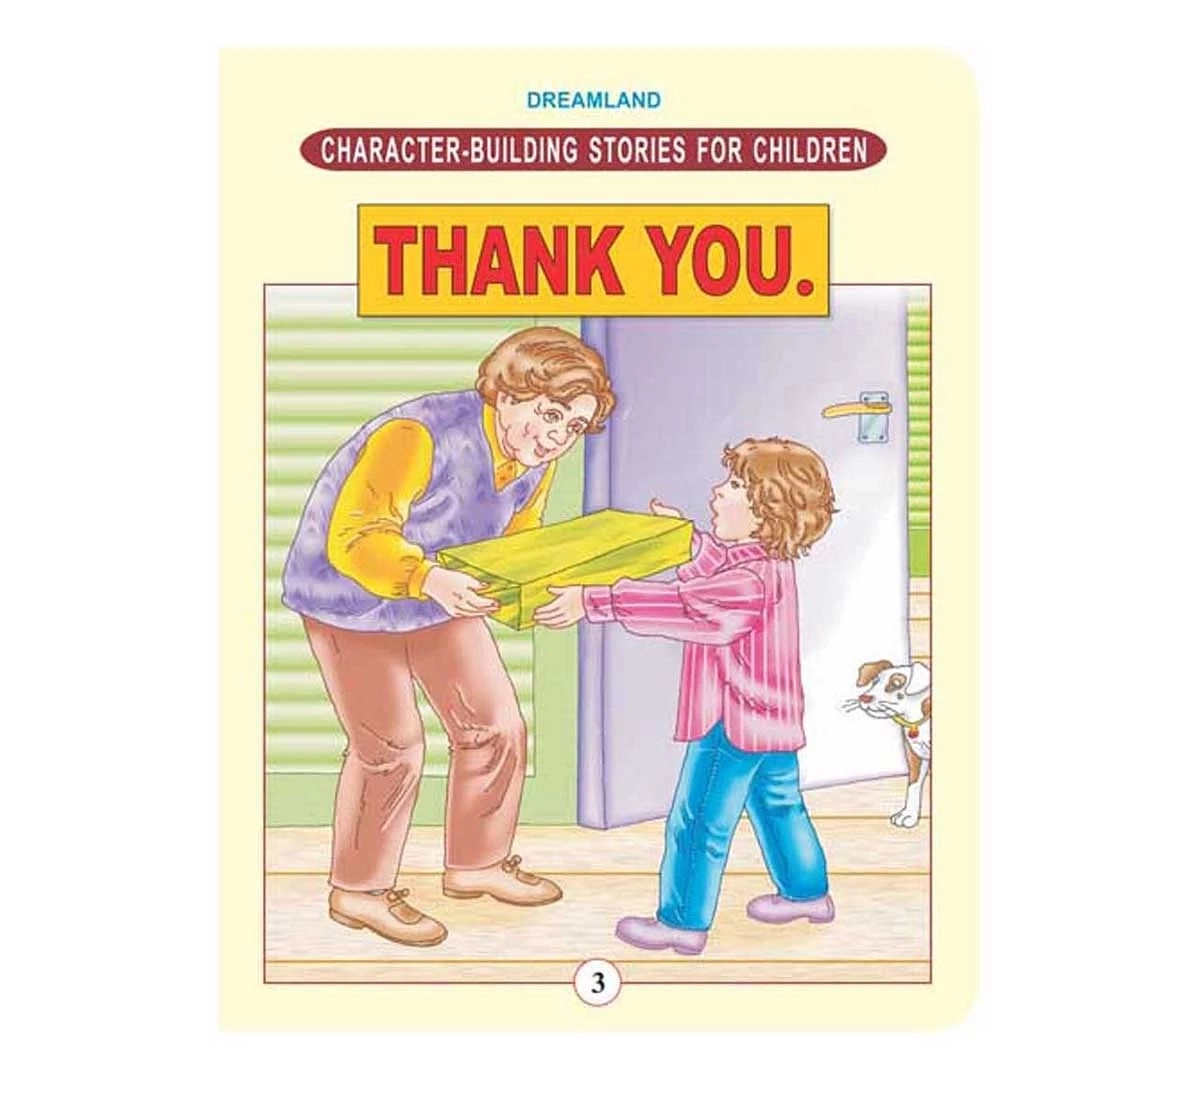 Dreamland Paper Back Character Building Thank You Story Books for kids 5Y+, Multicolour